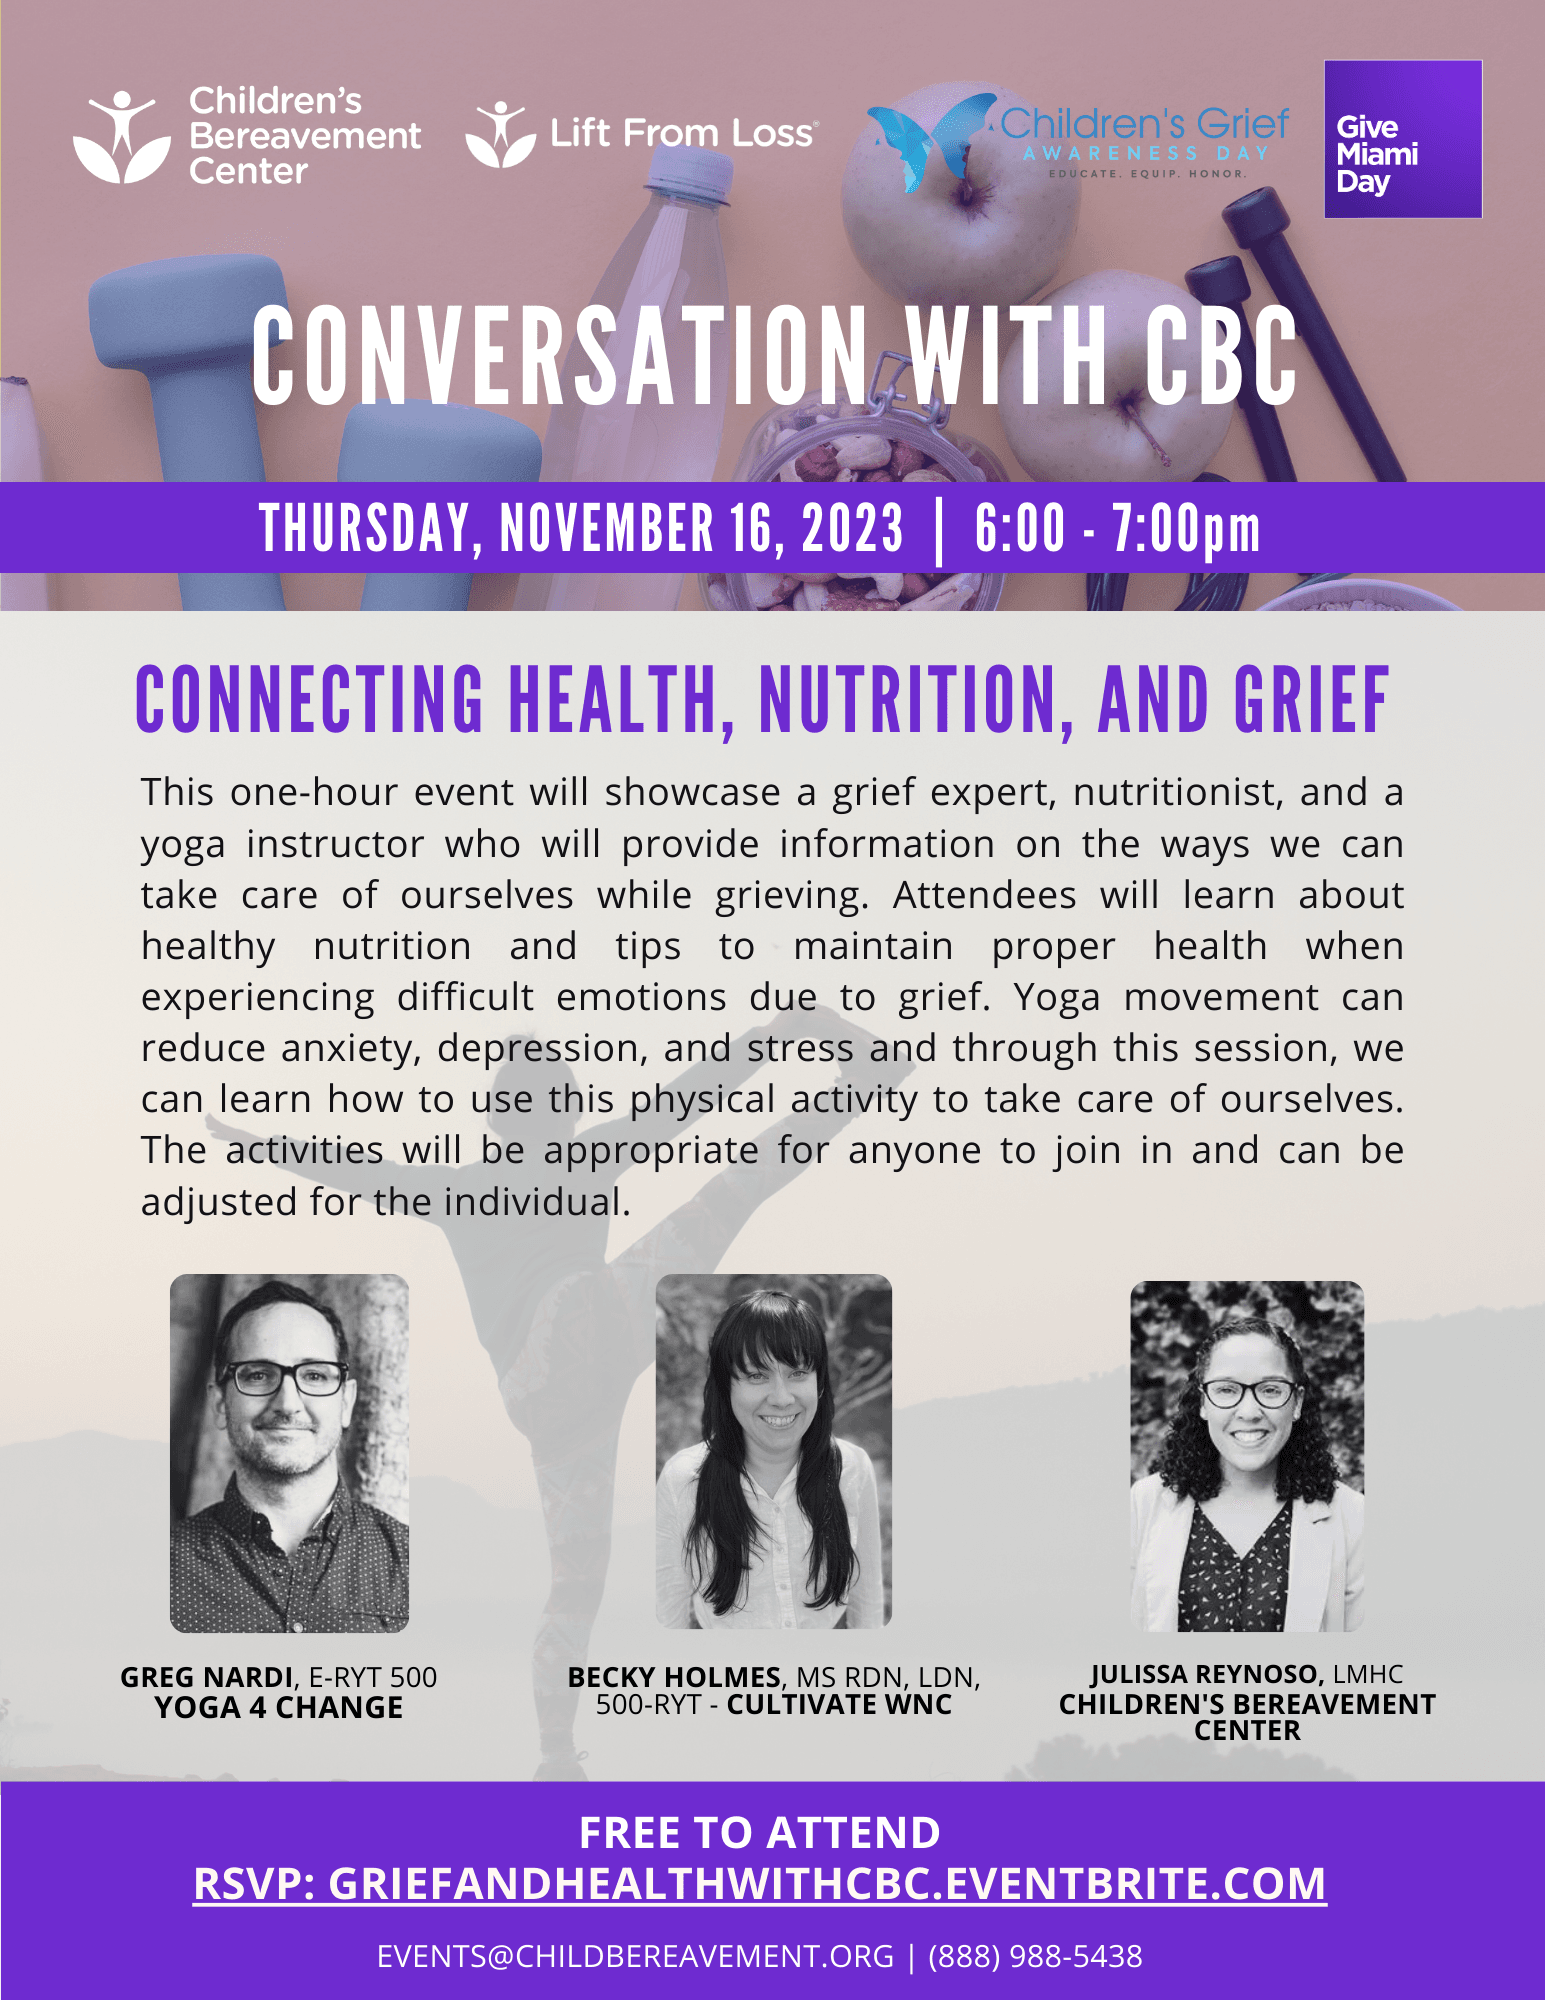 Connecting Health, Nutrition and Grief, a Conversation with CBC CBC